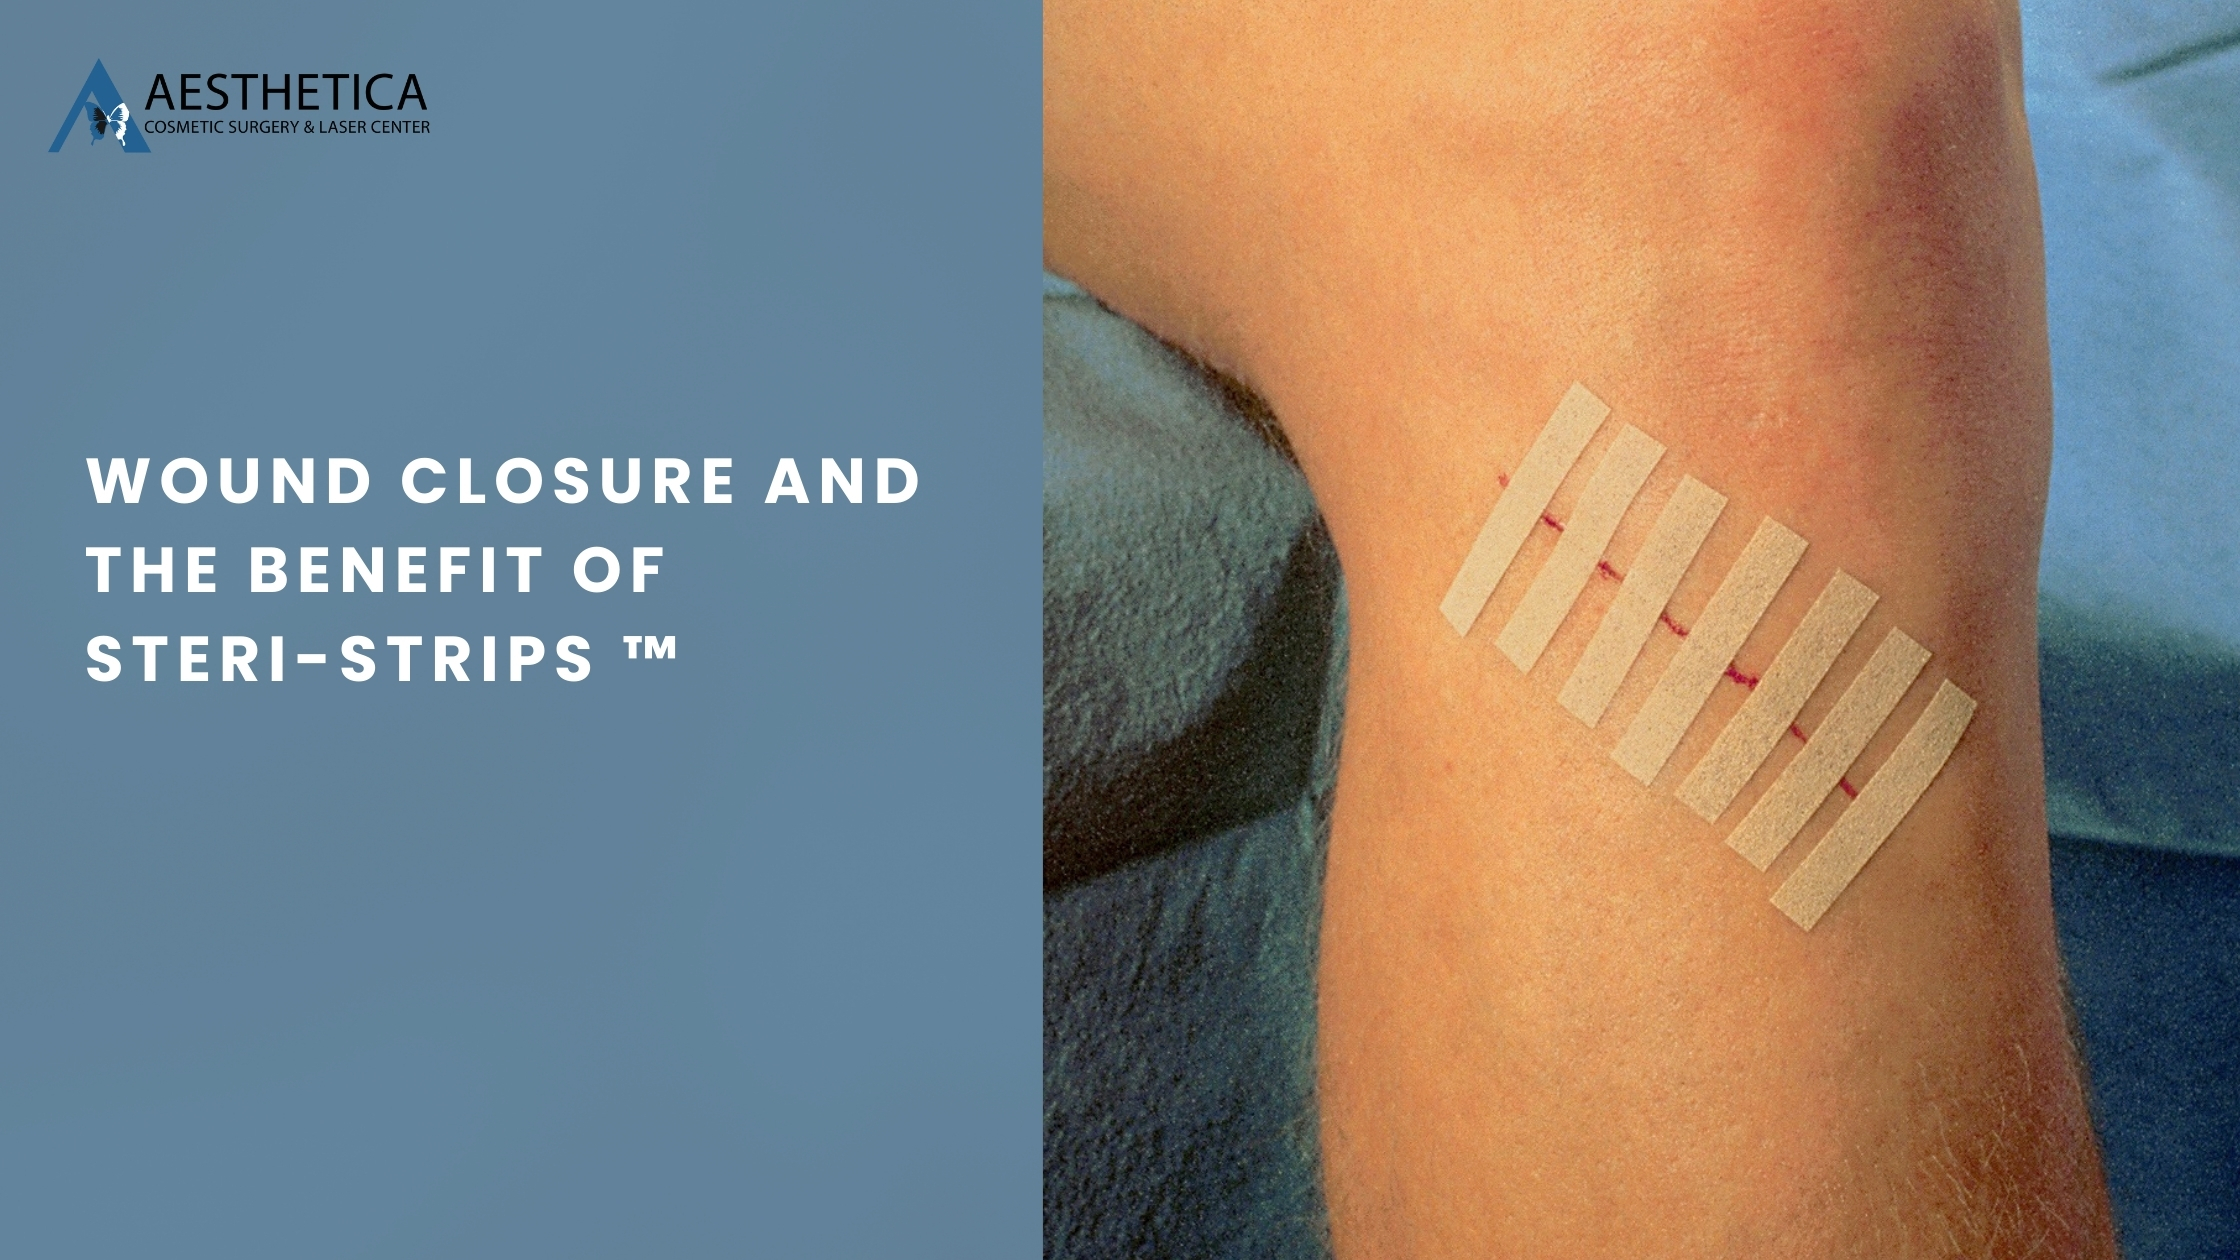 Wound Closure And The Benefit Of Steri-Strips ™